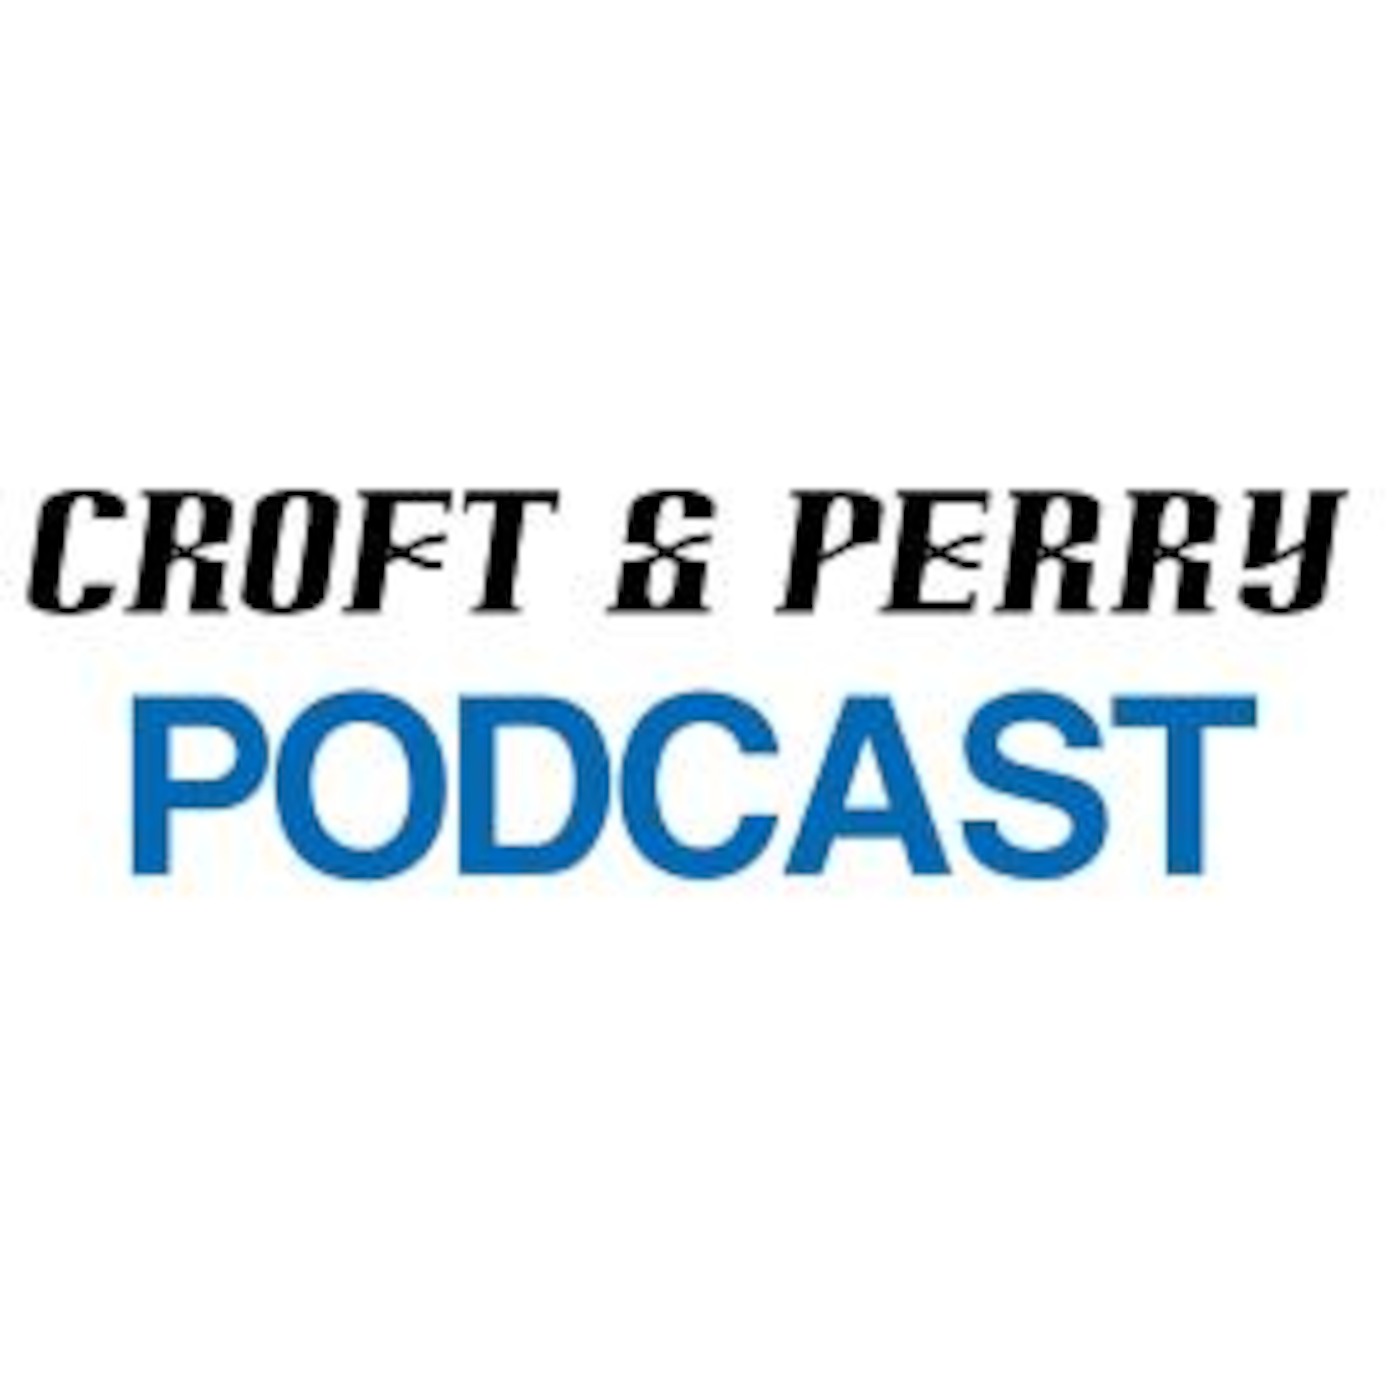 Croft & Perry Podcast